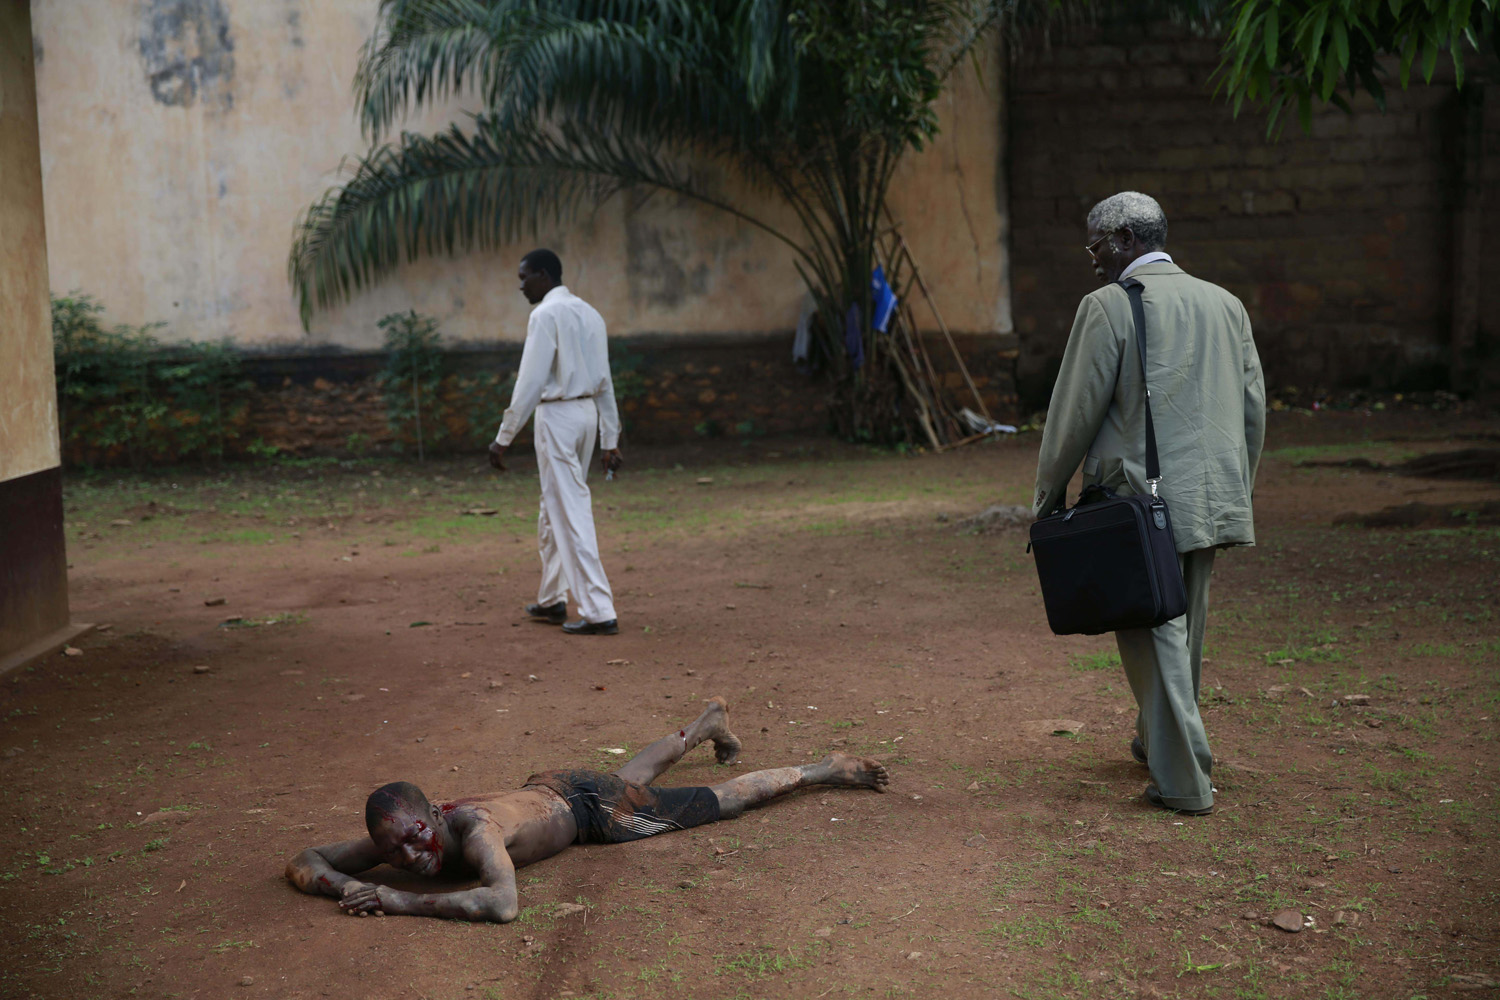 A man walks by Kevin, a man accused of being a thief by civil servants at the Work Inspection office, as he lays in pain after being attacked by a man with a machete and sticks,  in plain view of others, in Bangui, Central African Republic, April 18, 2014.